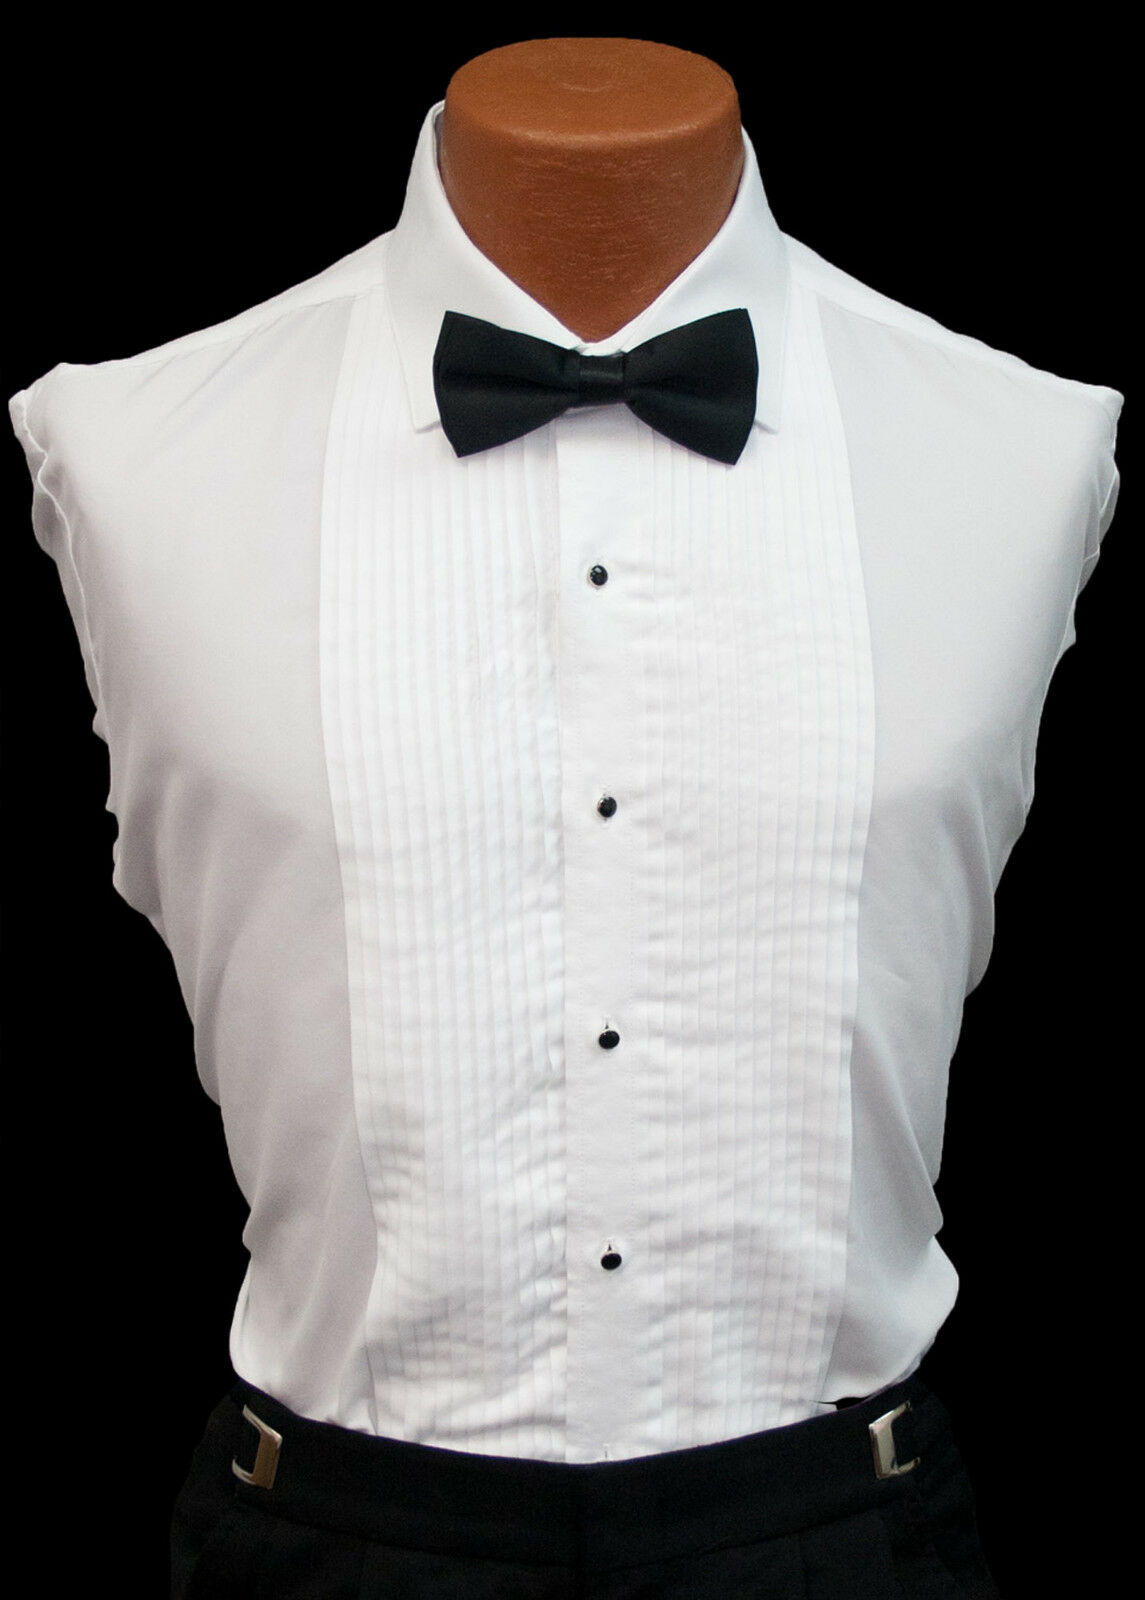 New Men's White Tuxedo Shirt Wing Or Laydown Collar Standard Cuffs Pleated Front